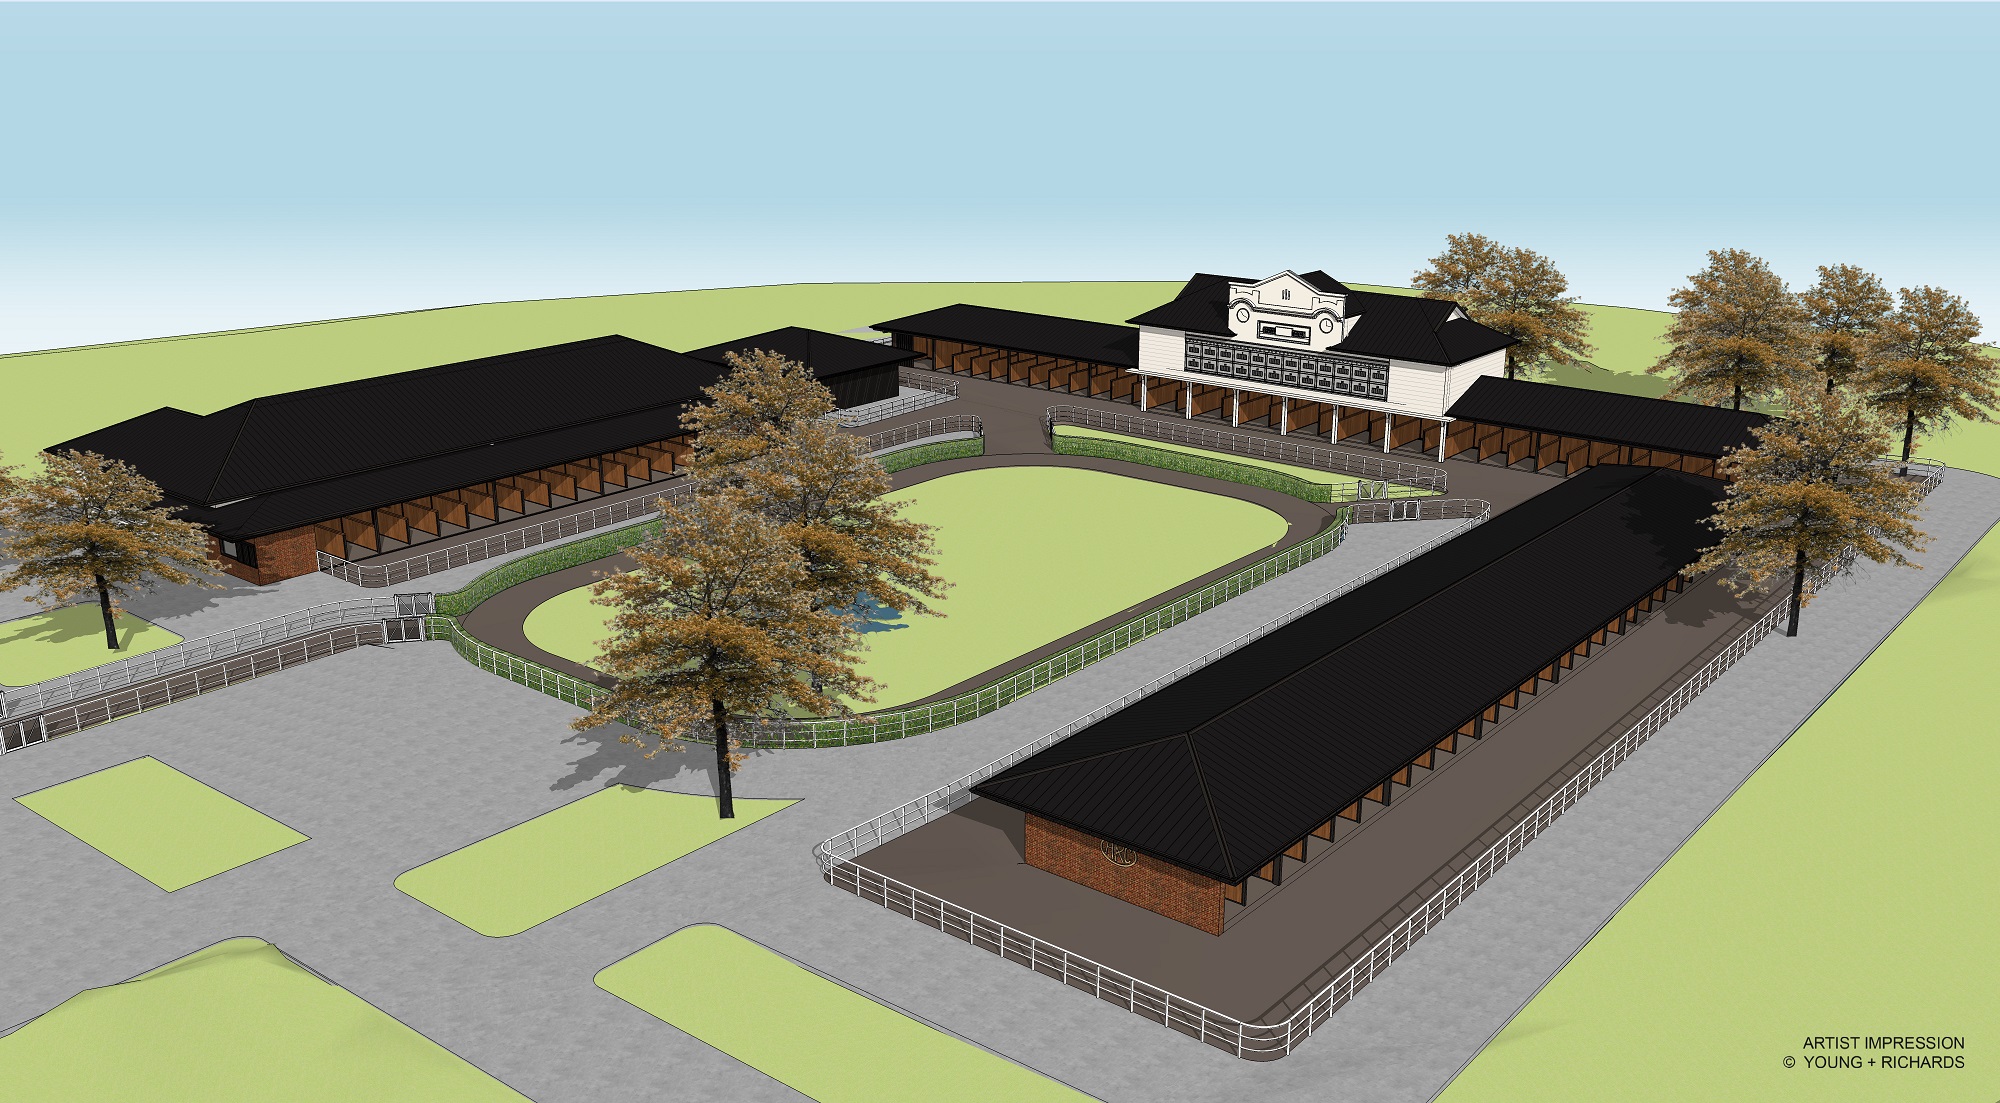 Racing into the future with our new stables